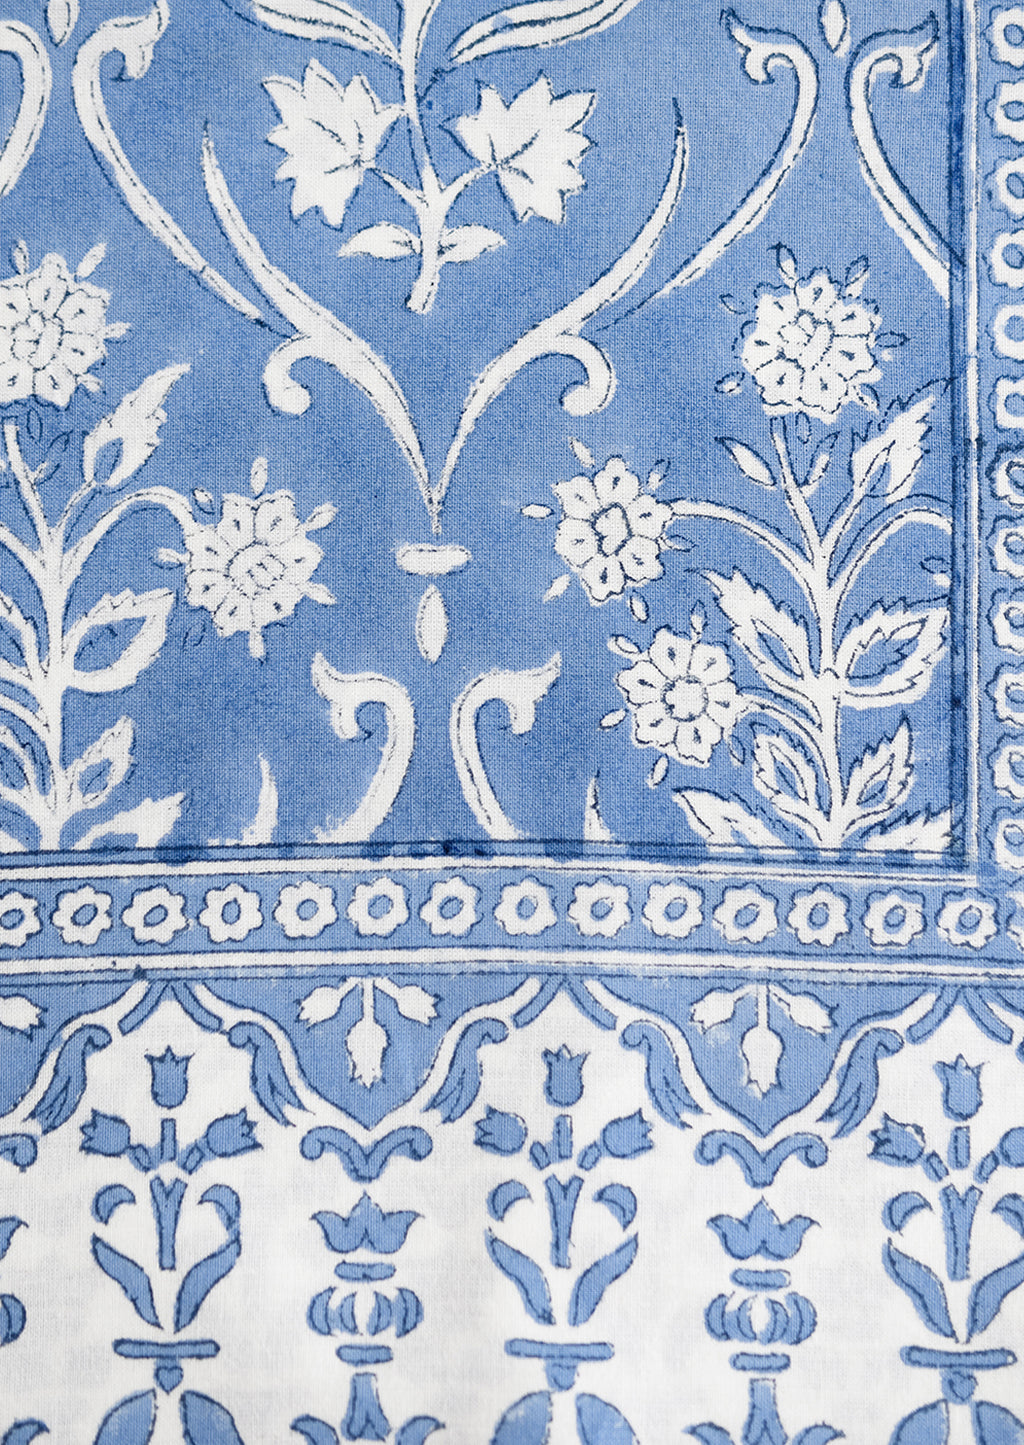 3: A floral print tablecloth in blue and white.